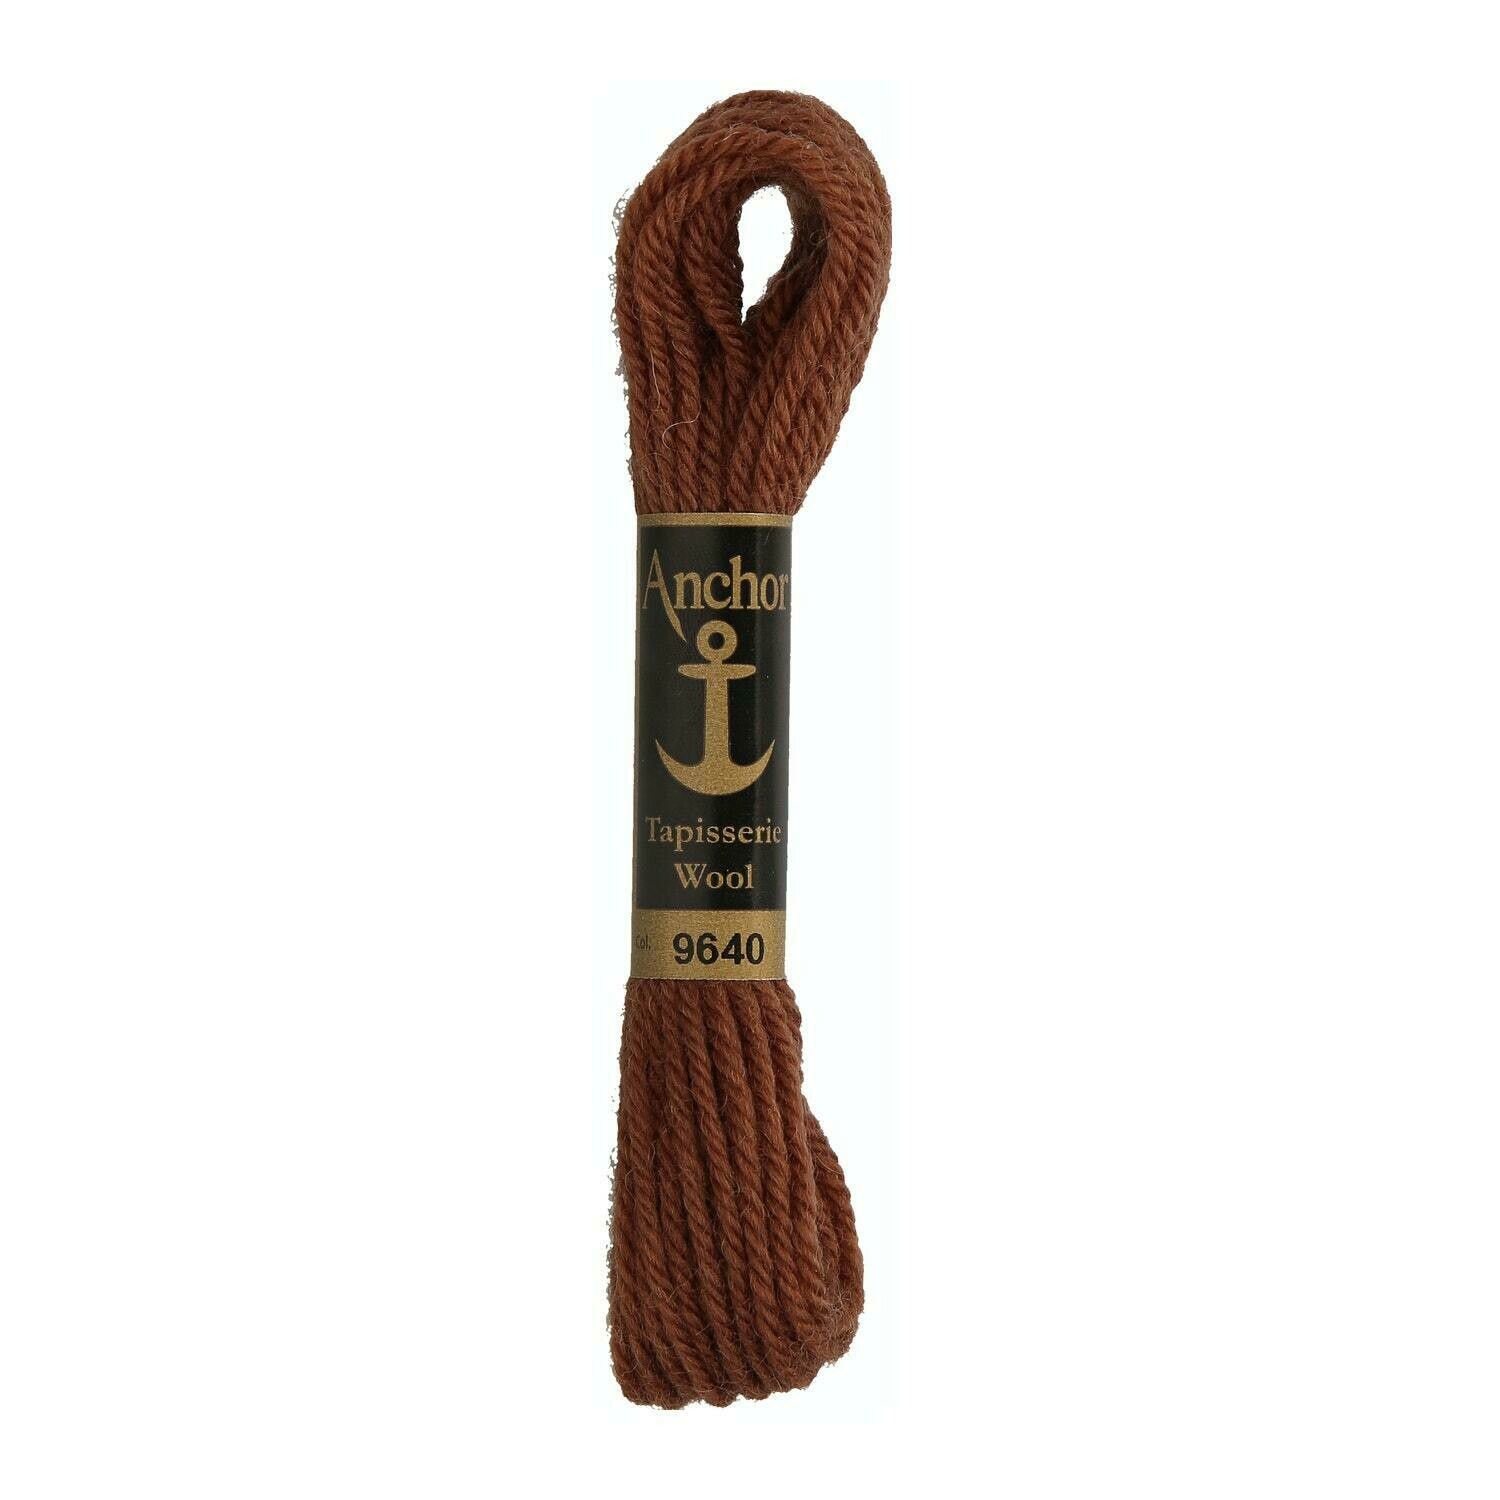 Anchor Tapisserie Wool #09640